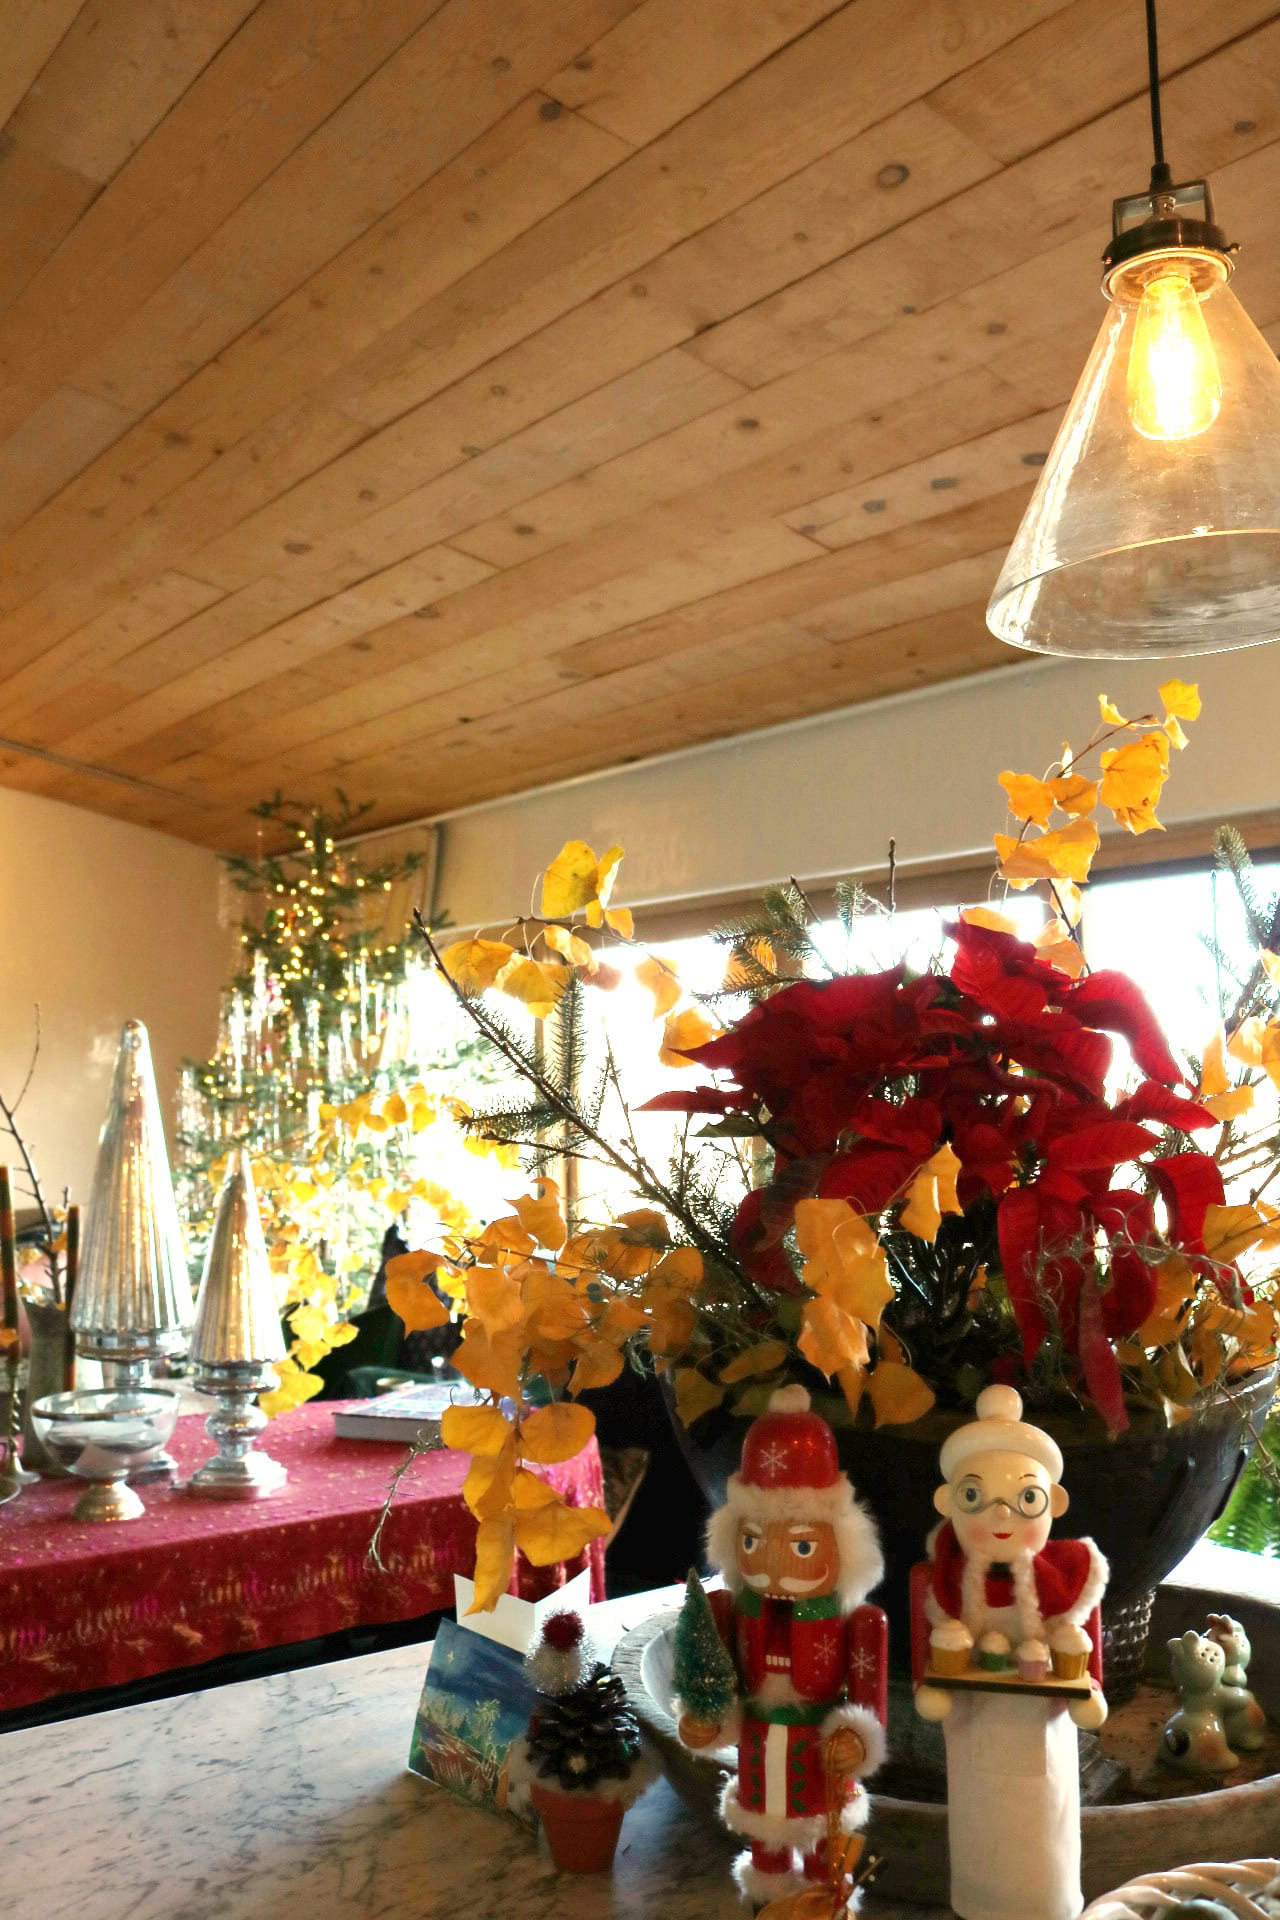 French & French Interiors table Christmas decorations including nutcrackers and holiday plants